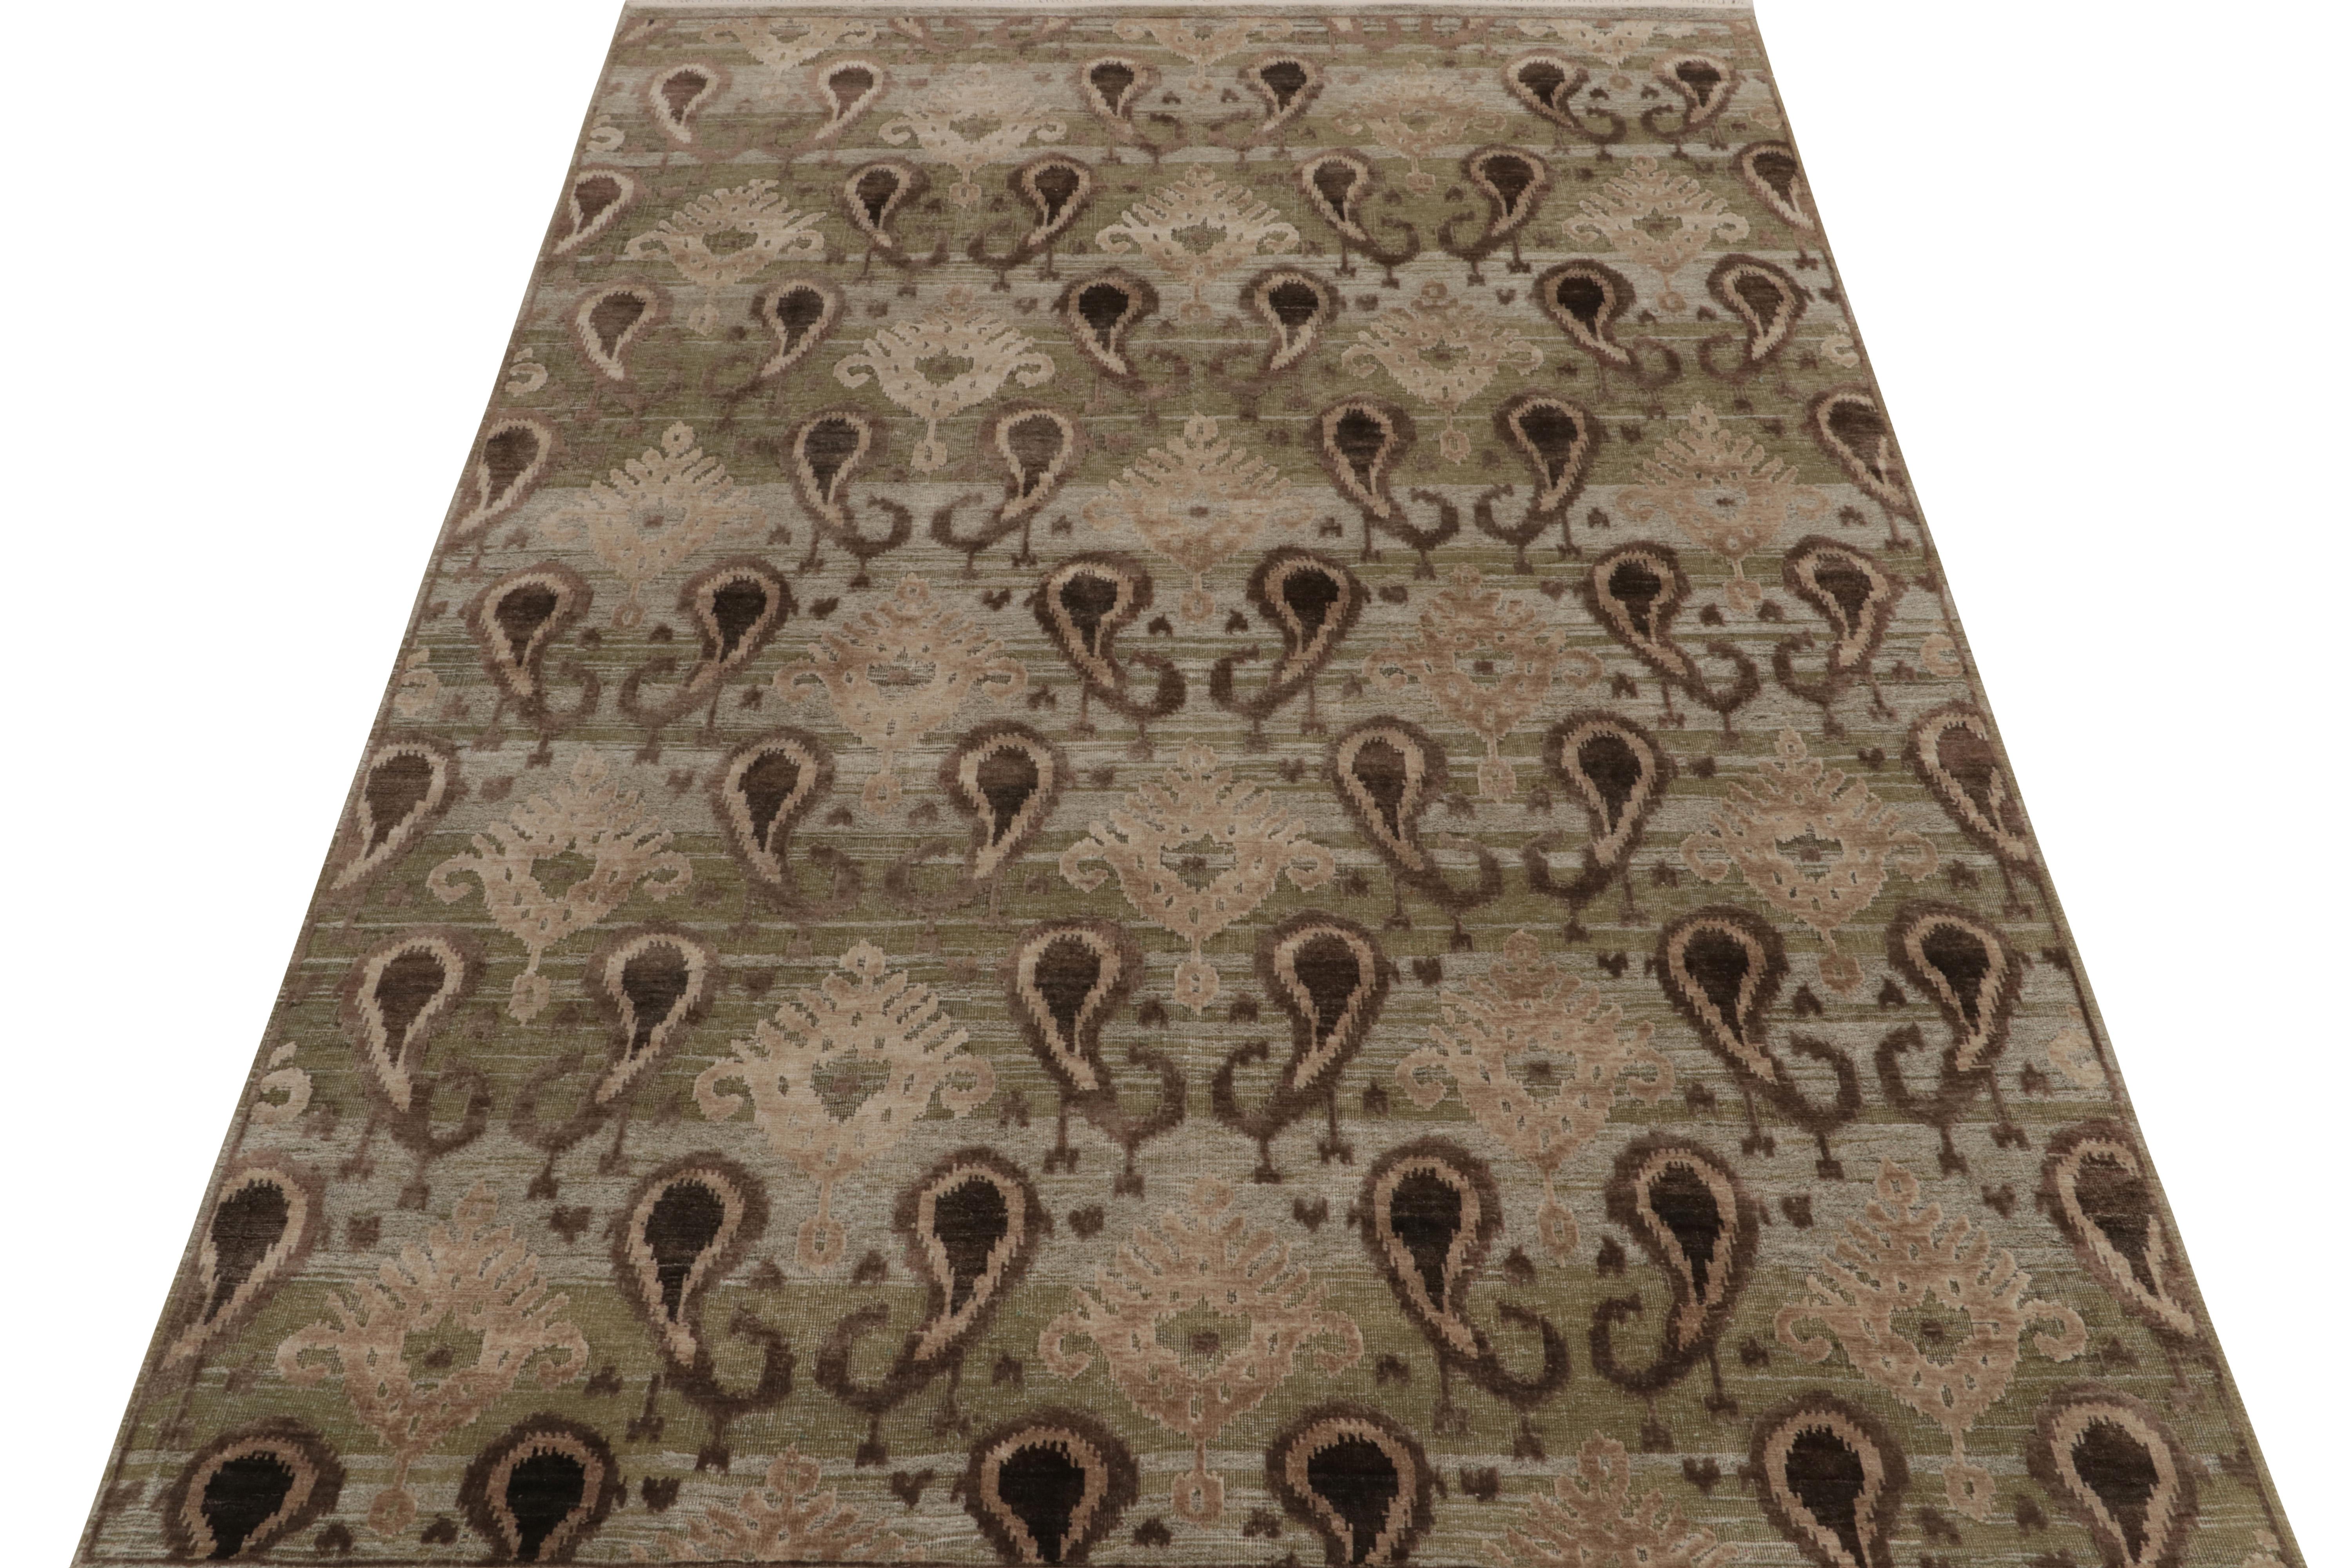 Indian Rug & Kilim’s Ikats Style rug in Green with Beige-Brown Paisley Floral Patterns For Sale